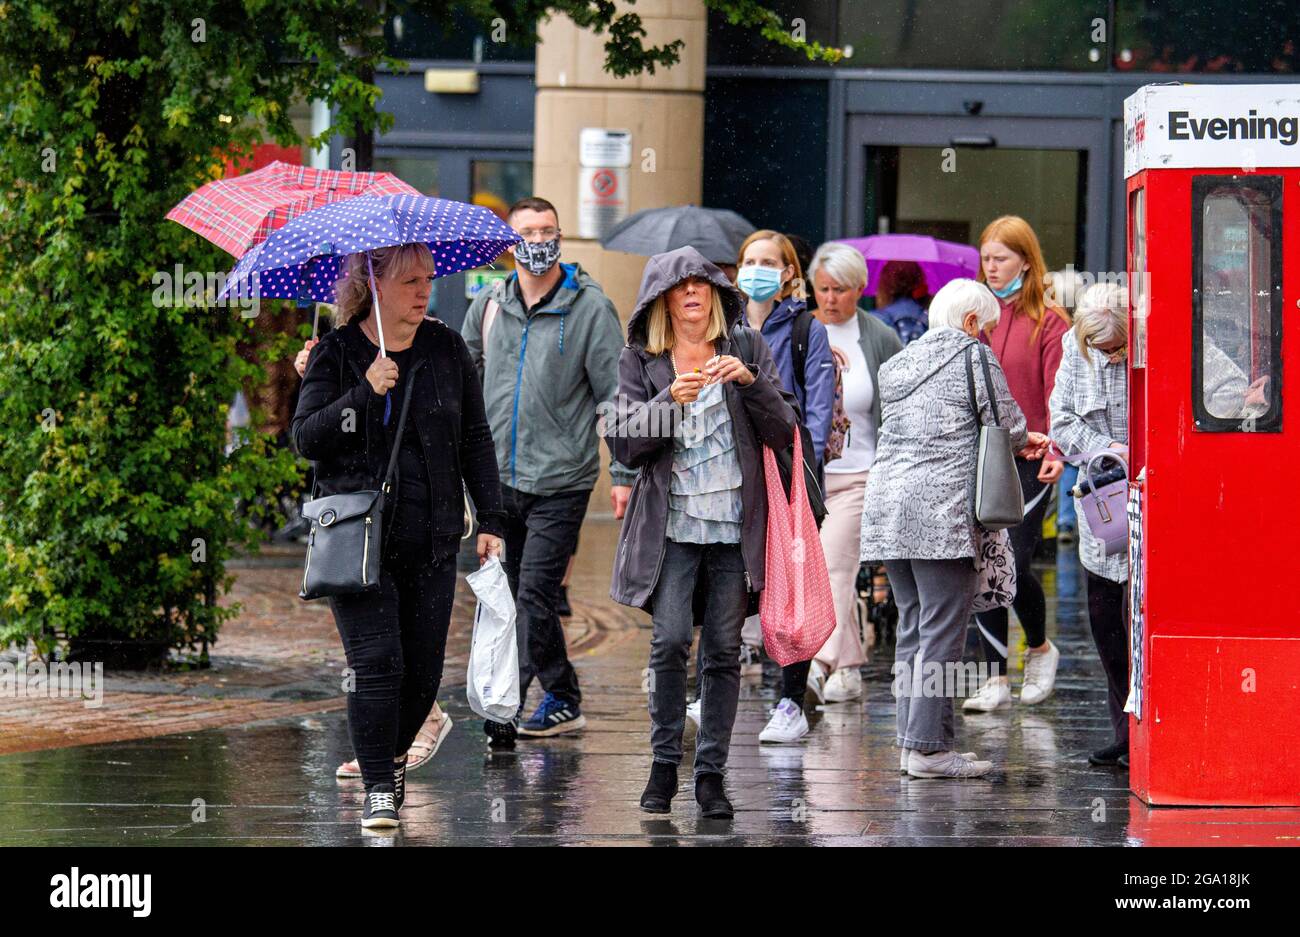 Dundee, Tayside, Scotland, UK. 28th July, 2021. UK Weather: Humid and overcast day with outbreaks of heavy rain across North East Scotland with temperatures reaching 21°C. Local residents are caught out in sudden outbursts of heavy rain whilst out shopping in Dundee city centre. Credit: Dundee Photographics/Alamy Live News Stock Photo